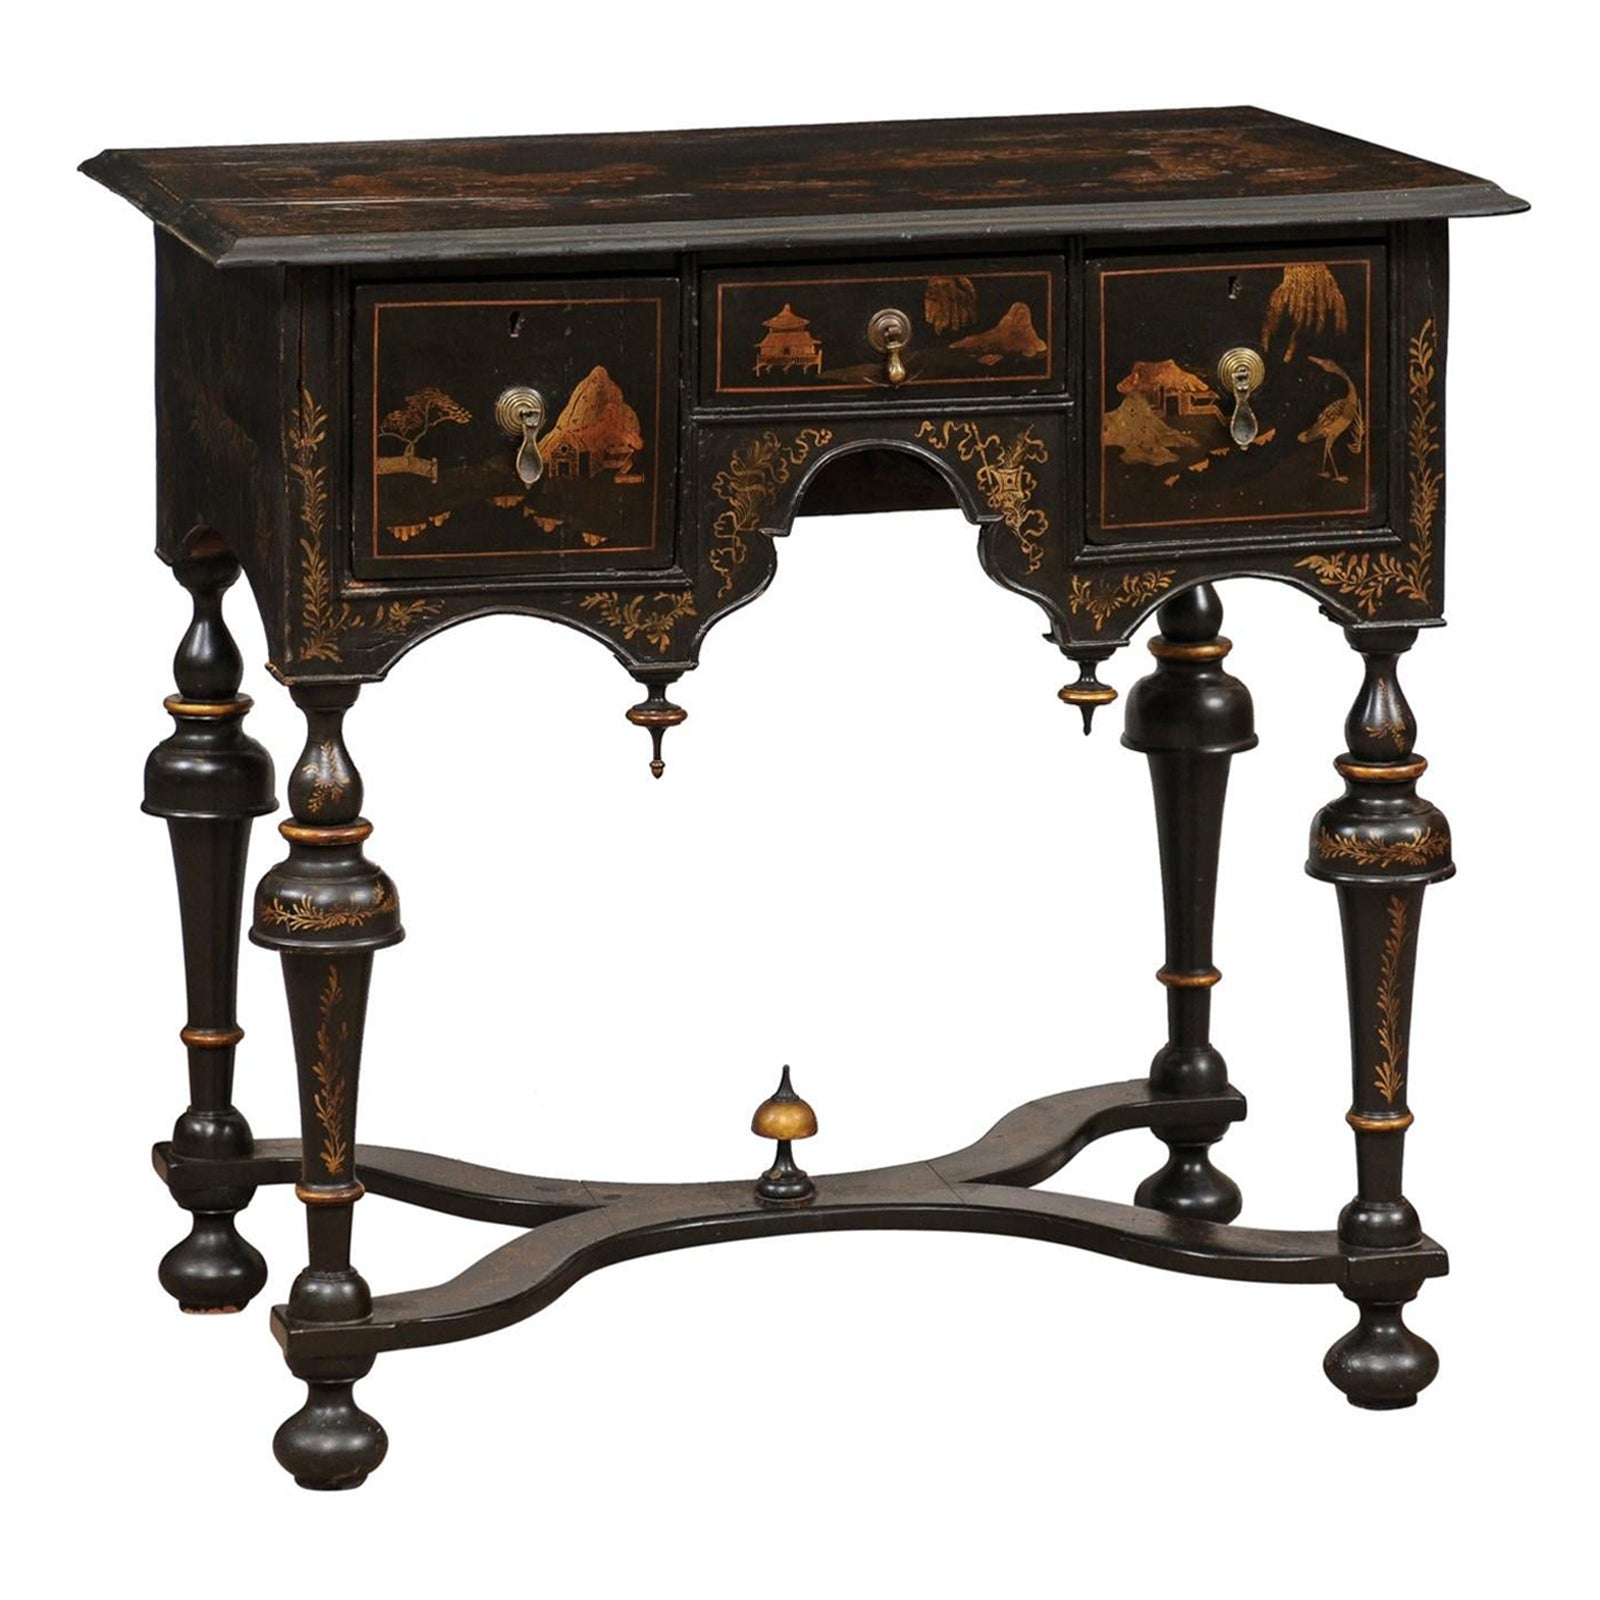 Black Lacquered Chinoiserie William & Mary Style Lowboy, 18th Century England